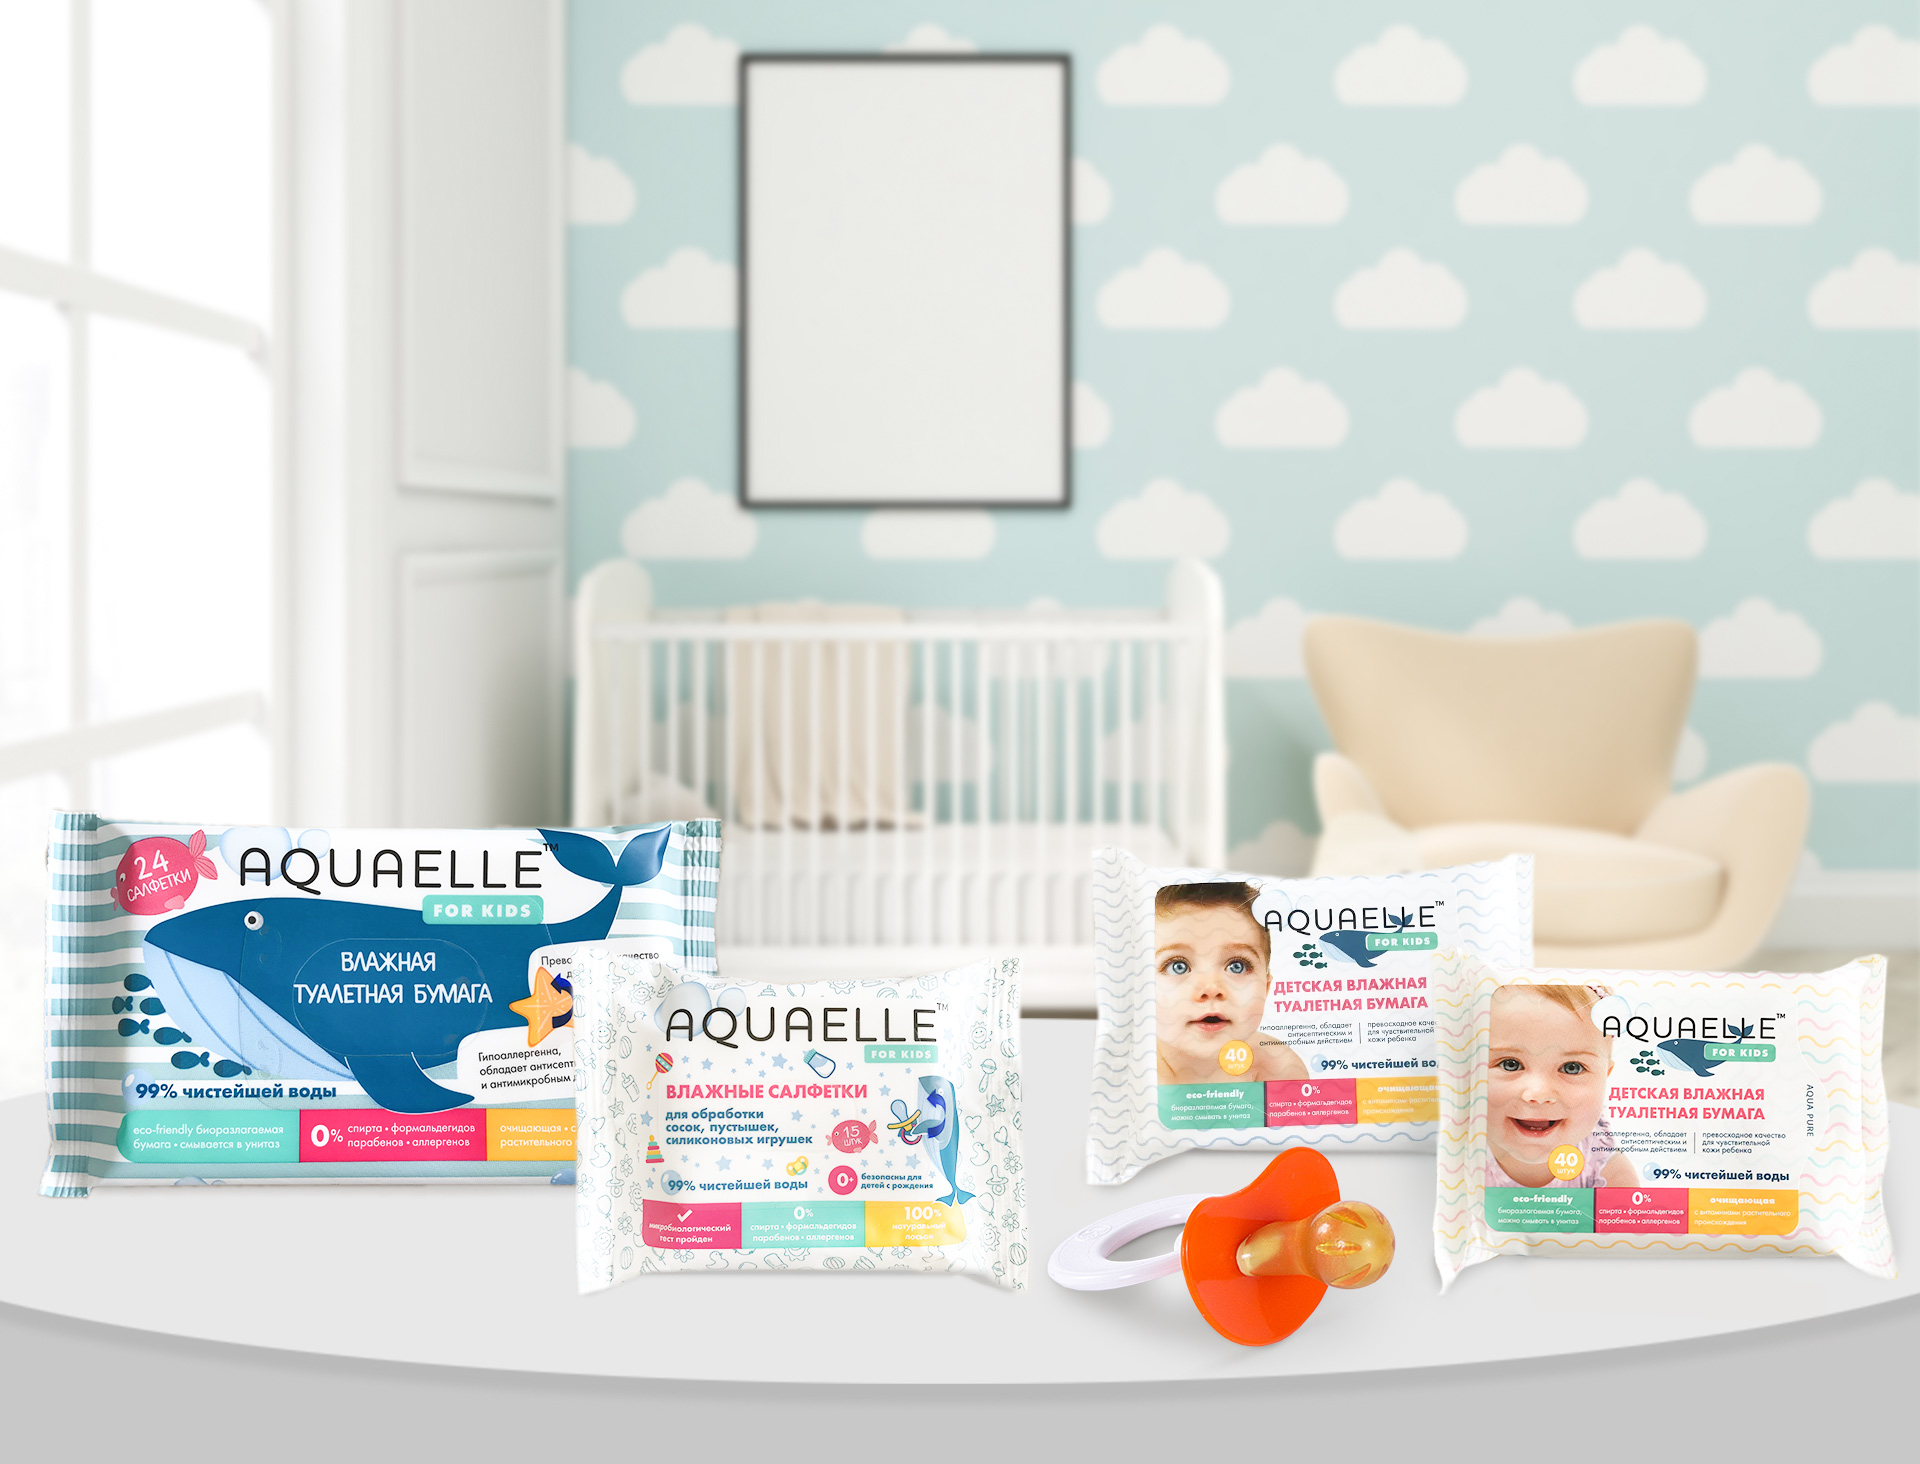 Aquaelle for Kids - taking care of children since birth!